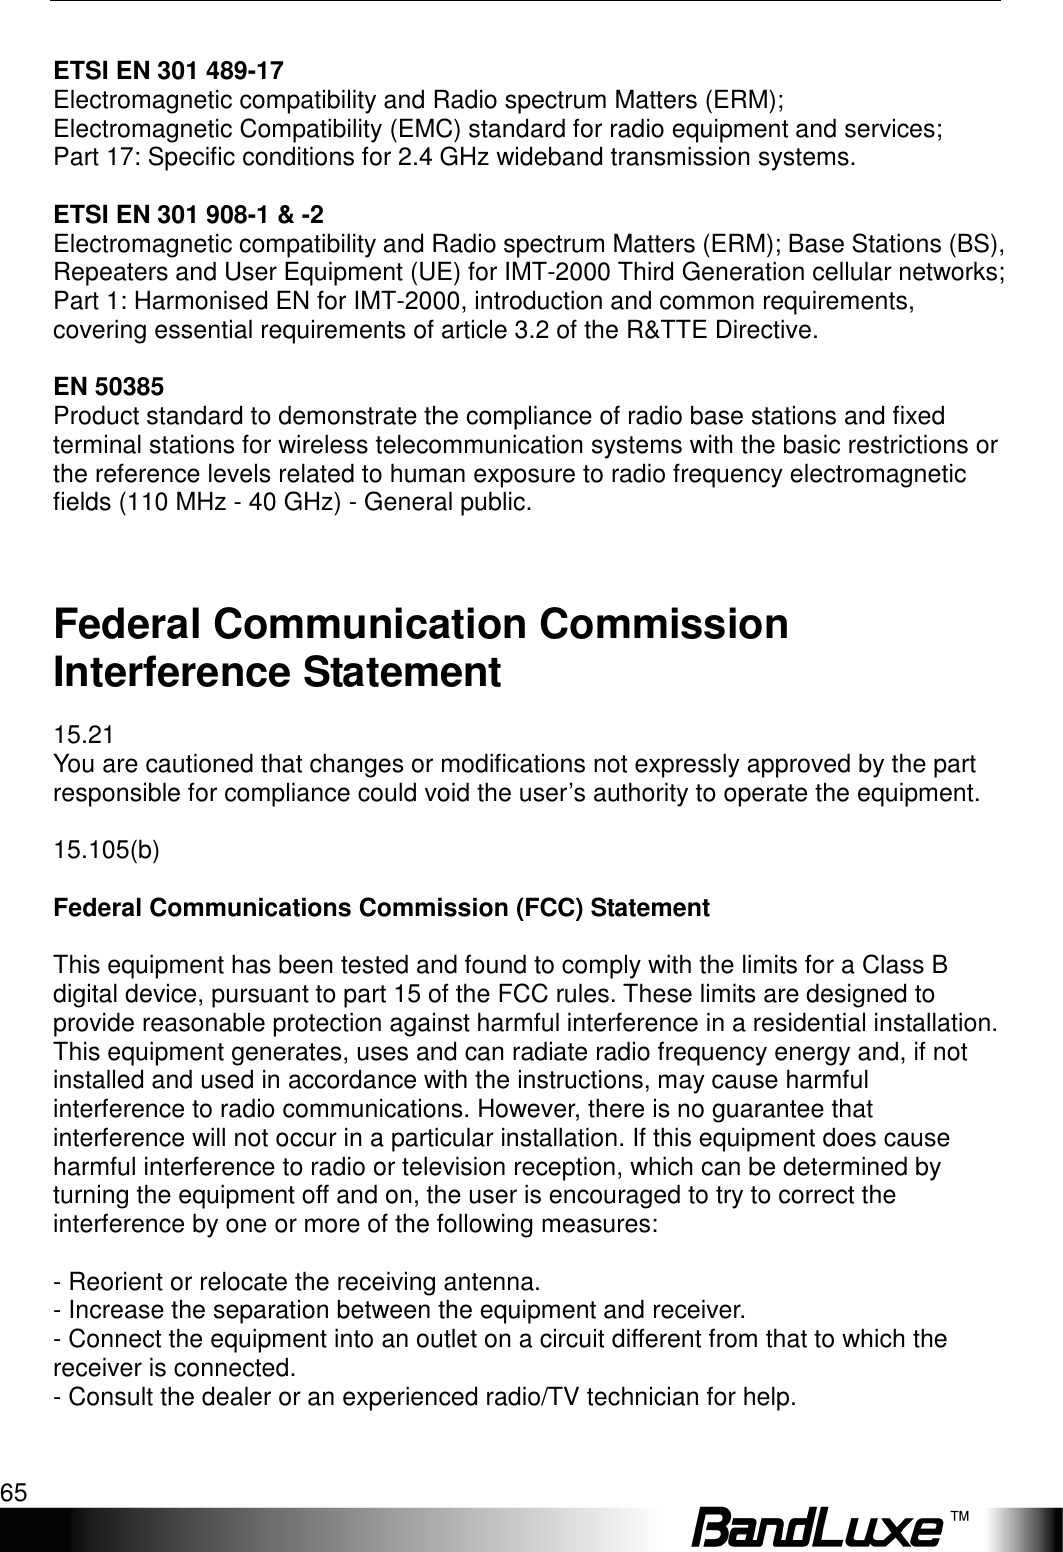   Appendix C: Important Safety Information and Glossary 65  ETSI EN 301 489-17 Electromagnetic compatibility and Radio spectrum Matters (ERM); Electromagnetic Compatibility (EMC) standard for radio equipment and services; Part 17: Specific conditions for 2.4 GHz wideband transmission systems.  ETSI EN 301 908-1 &amp; -2 Electromagnetic compatibility and Radio spectrum Matters (ERM); Base Stations (BS), Repeaters and User Equipment (UE) for IMT-2000 Third Generation cellular networks; Part 1: Harmonised EN for IMT-2000, introduction and common requirements, covering essential requirements of article 3.2 of the R&amp;TTE Directive.  EN 50385 Product standard to demonstrate the compliance of radio base stations and fixed terminal stations for wireless telecommunication systems with the basic restrictions or the reference levels related to human exposure to radio frequency electromagnetic fields (110 MHz - 40 GHz) - General public.  Federal Communication Commission Interference Statement 15.21 You are cautioned that changes or modifications not expressly approved by the part responsible for compliance could void the user’s authority to operate the equipment.  15.105(b)  Federal Communications Commission (FCC) Statement  This equipment has been tested and found to comply with the limits for a Class B digital device, pursuant to part 15 of the FCC rules. These limits are designed to provide reasonable protection against harmful interference in a residential installation. This equipment generates, uses and can radiate radio frequency energy and, if not installed and used in accordance with the instructions, may cause harmful interference to radio communications. However, there is no guarantee that interference will not occur in a particular installation. If this equipment does cause harmful interference to radio or television reception, which can be determined by turning the equipment off and on, the user is encouraged to try to correct the interference by one or more of the following measures:  - Reorient or relocate the receiving antenna. - Increase the separation between the equipment and receiver. - Connect the equipment into an outlet on a circuit different from that to which the receiver is connected. - Consult the dealer or an experienced radio/TV technician for help.  